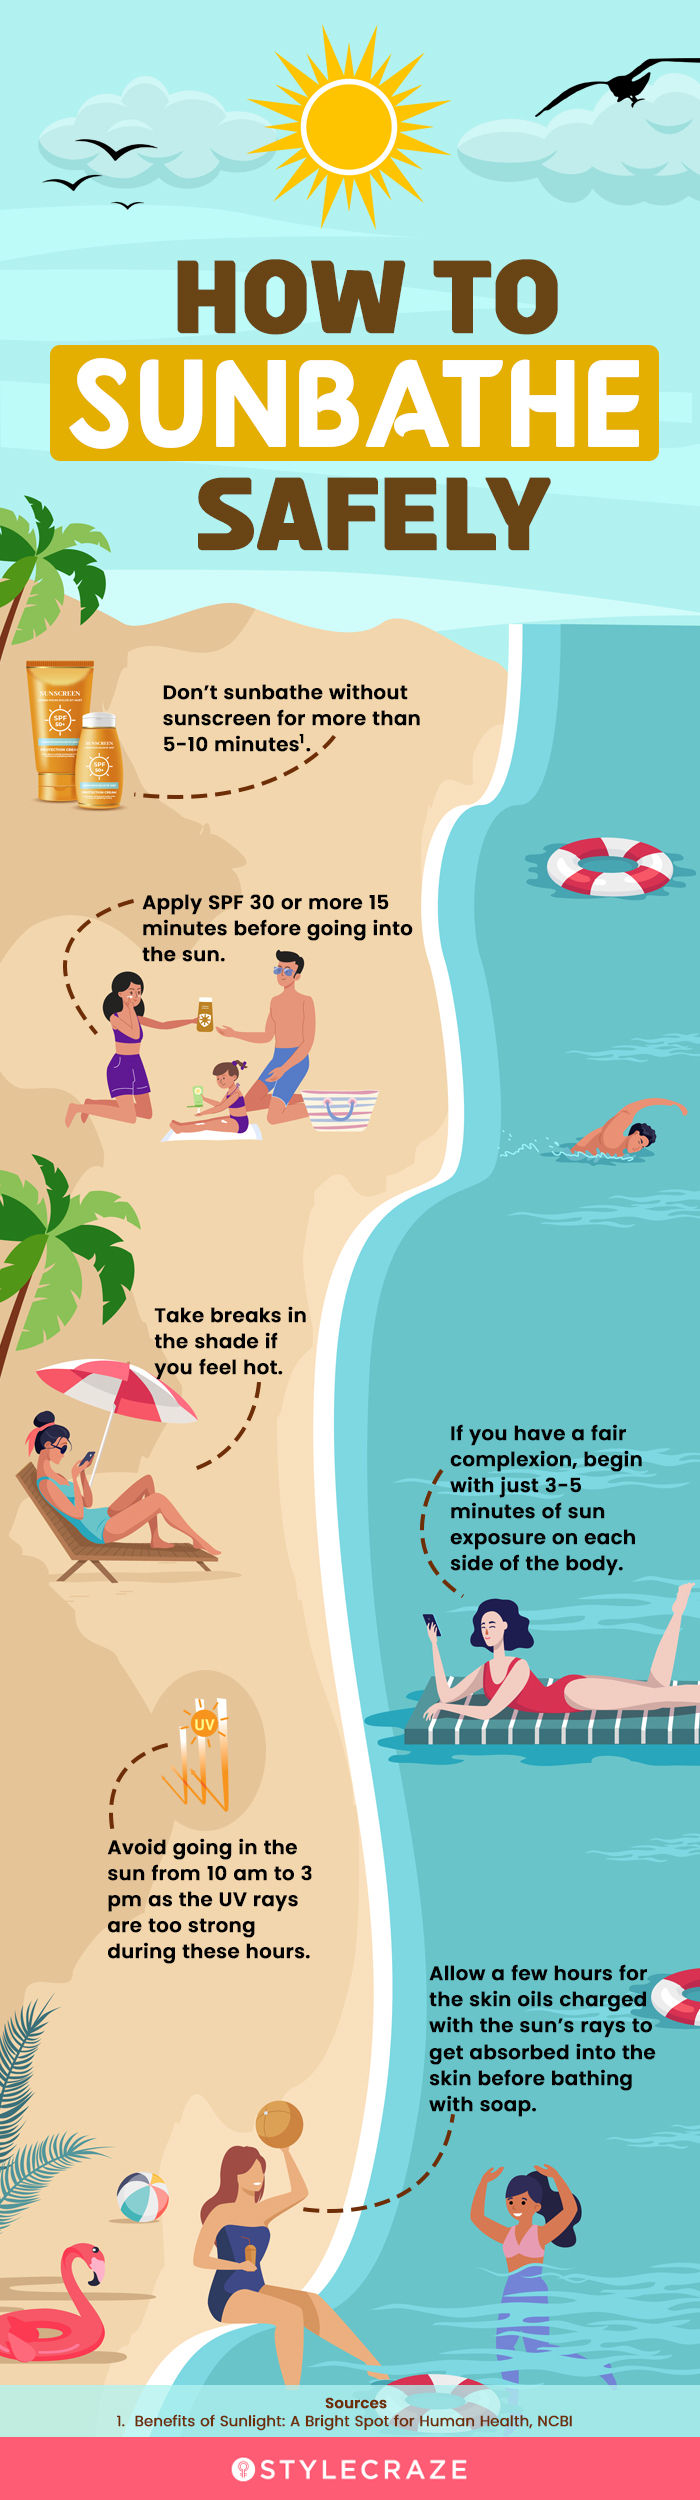 how to sunbathe safely [infographic]